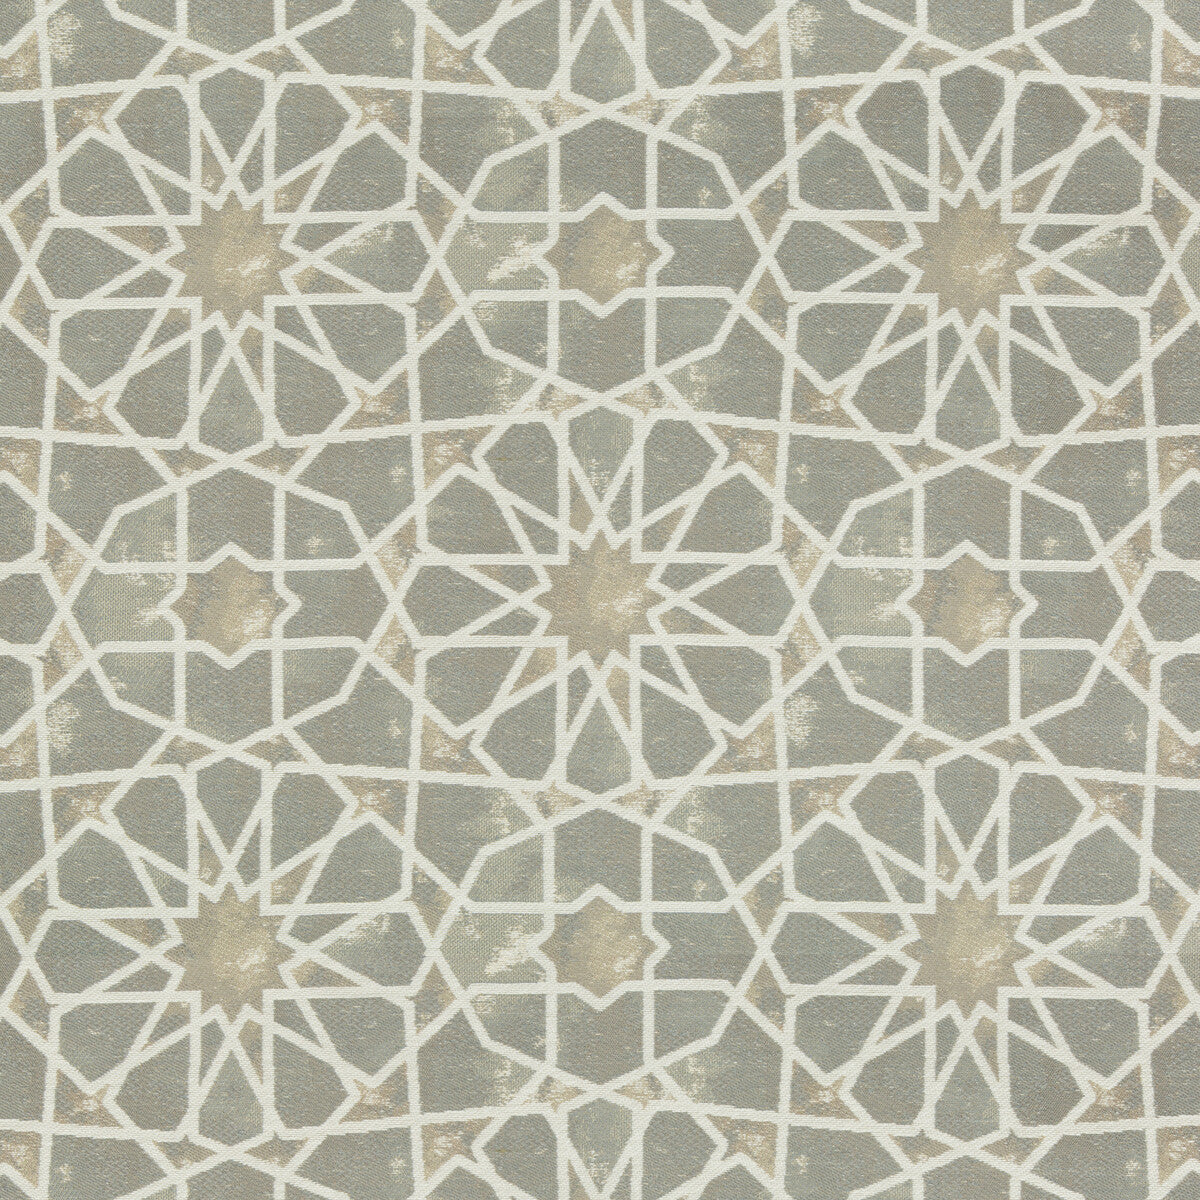 Kravet Design fabric in 35100-11 color - pattern 35100.11.0 - by Kravet Design in the Performance Crypton Home collection